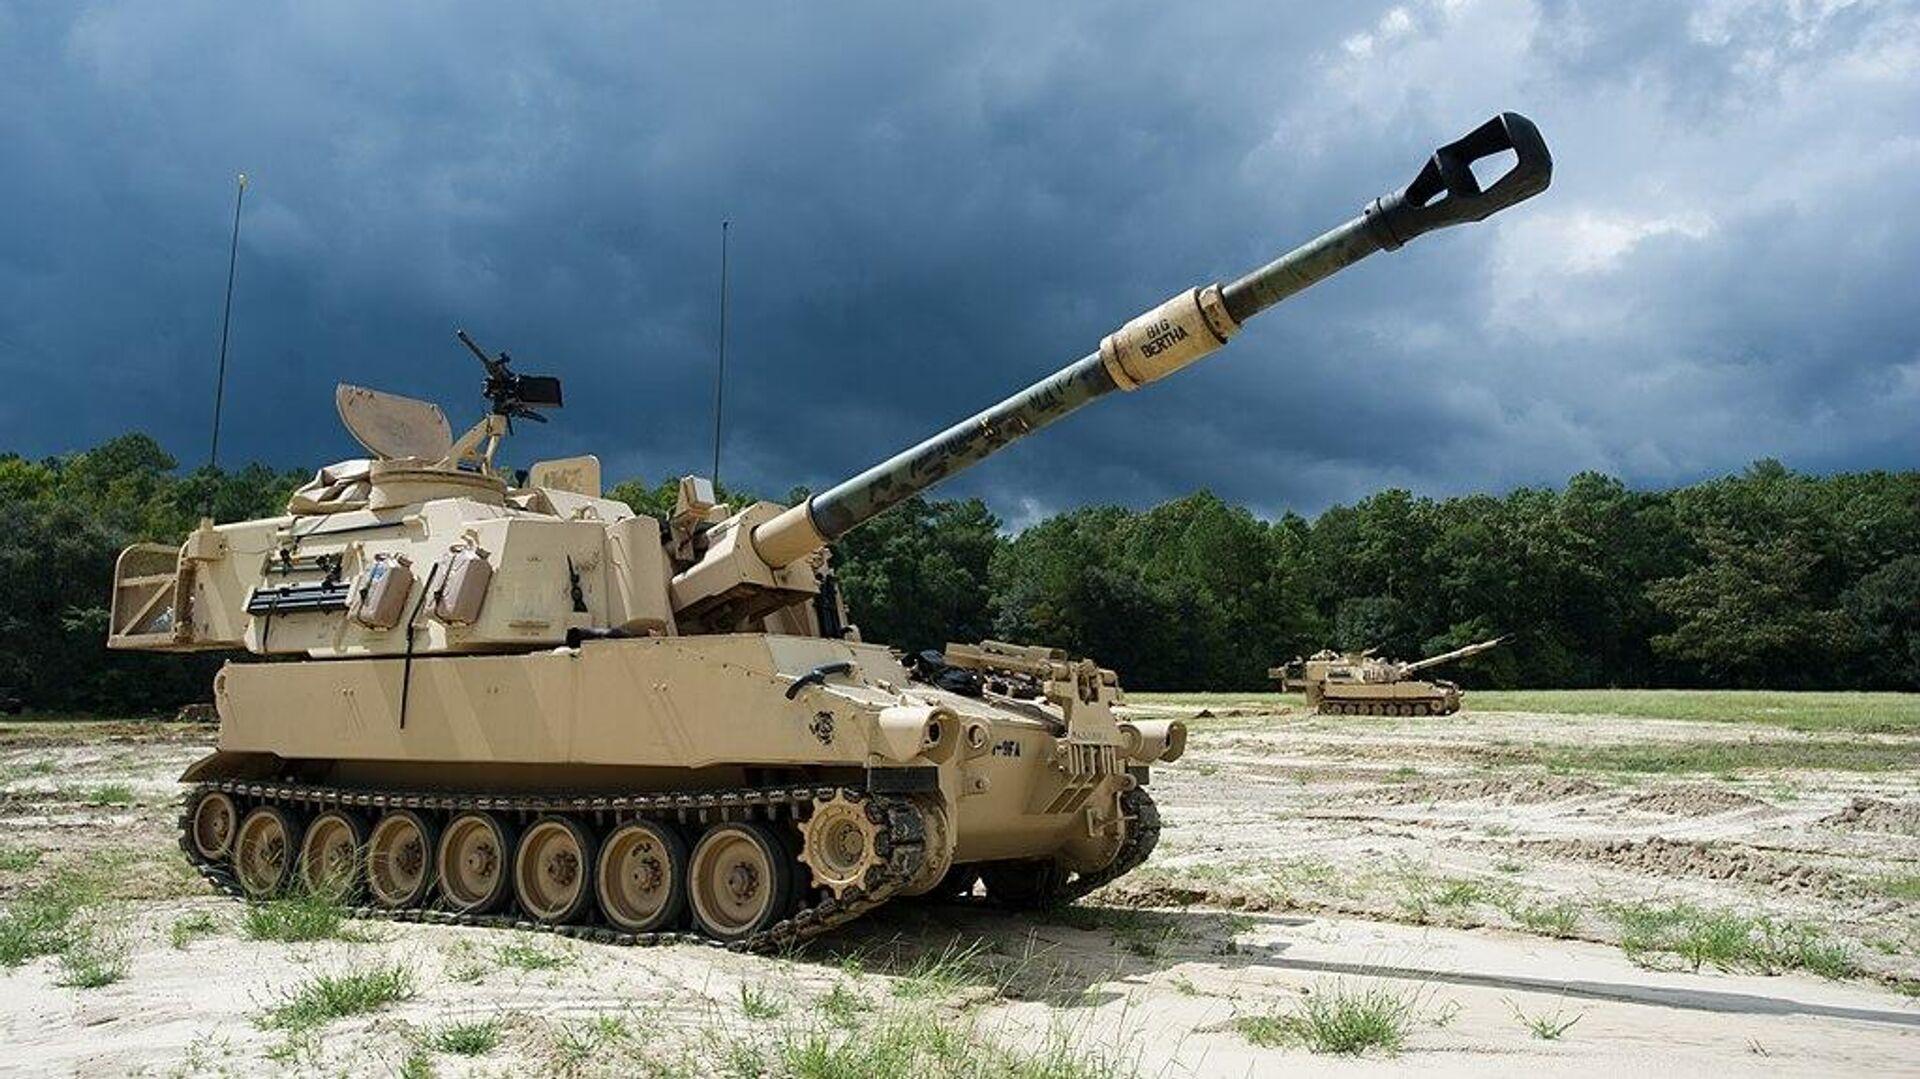 Ukraine to receive 30 M109L self-propelled howitzer from Italy